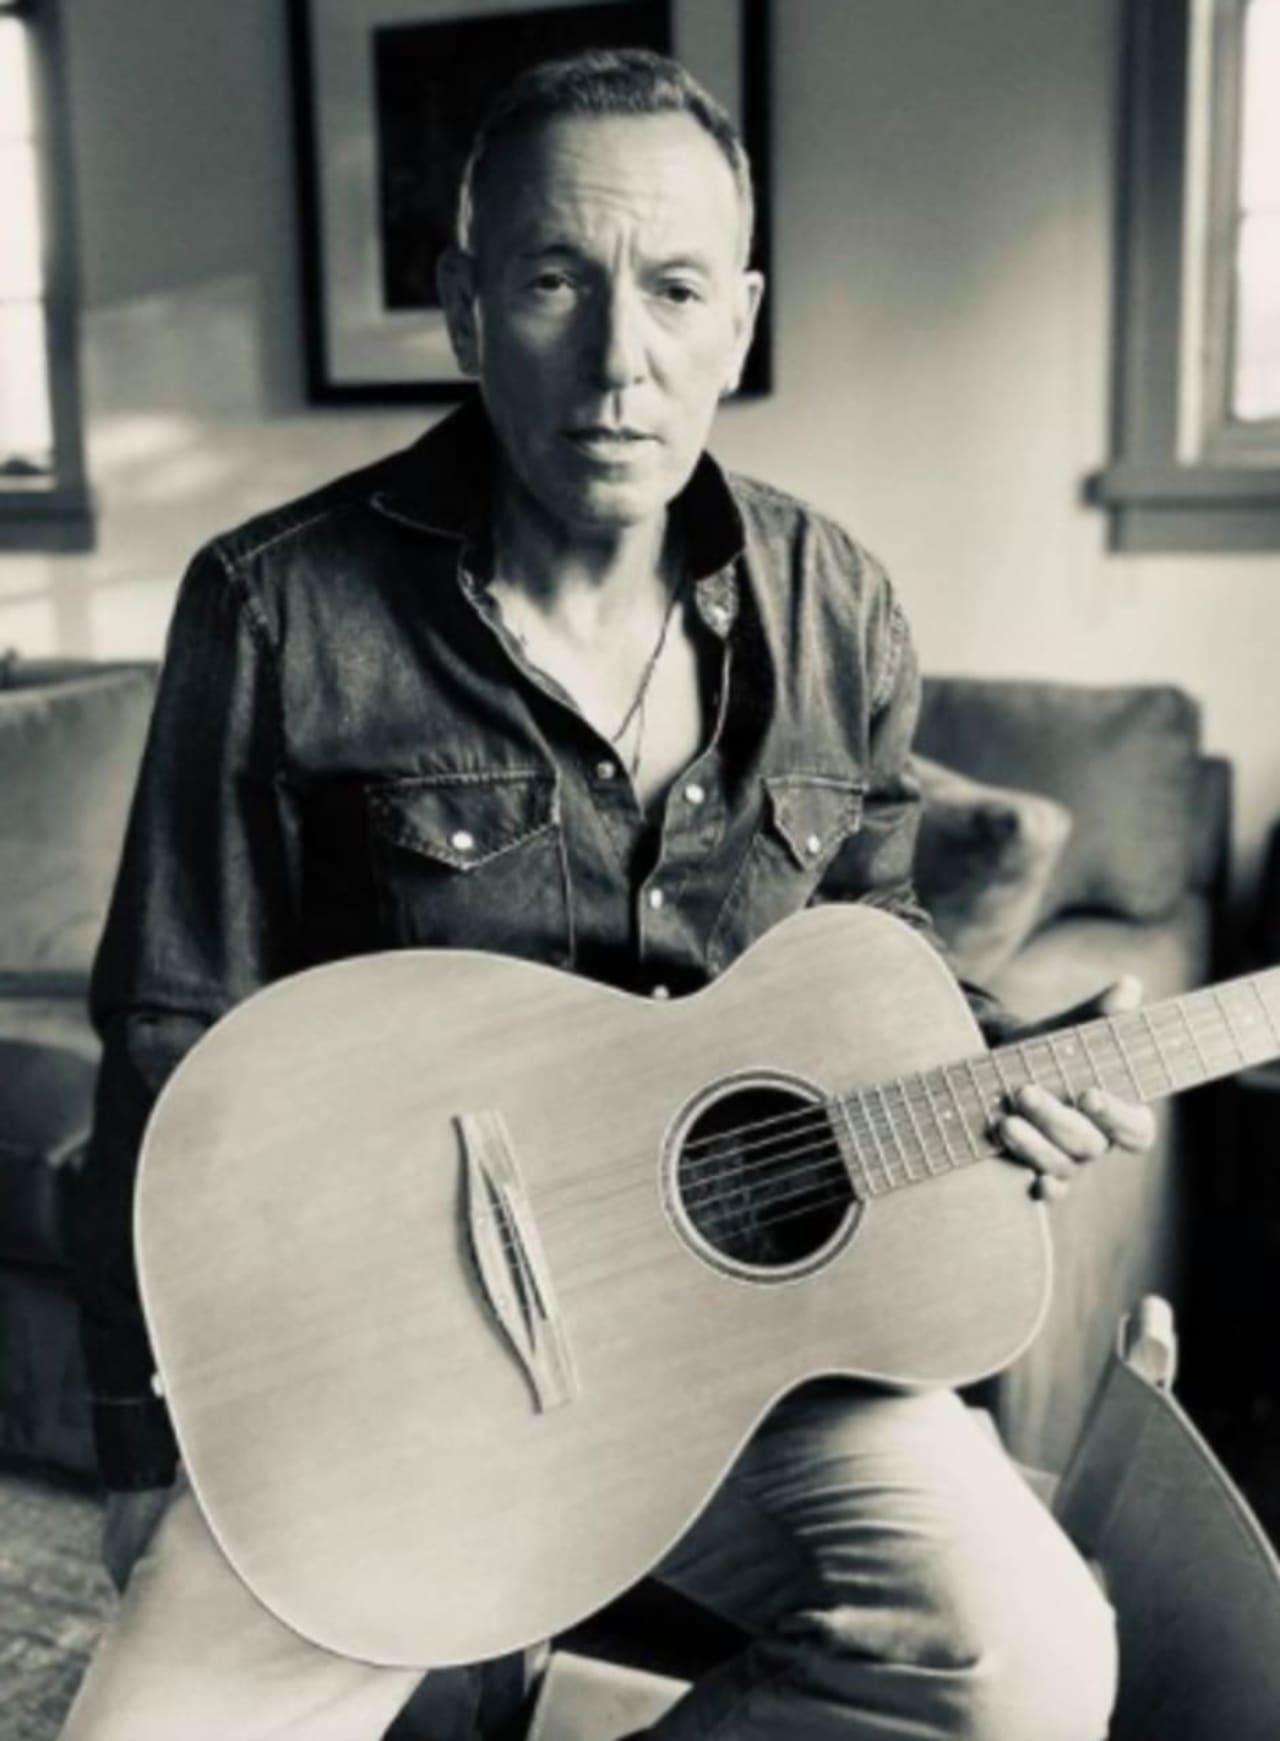 The Jersey Shore's Bruce Springsteen introducing a new album, and new guitar.